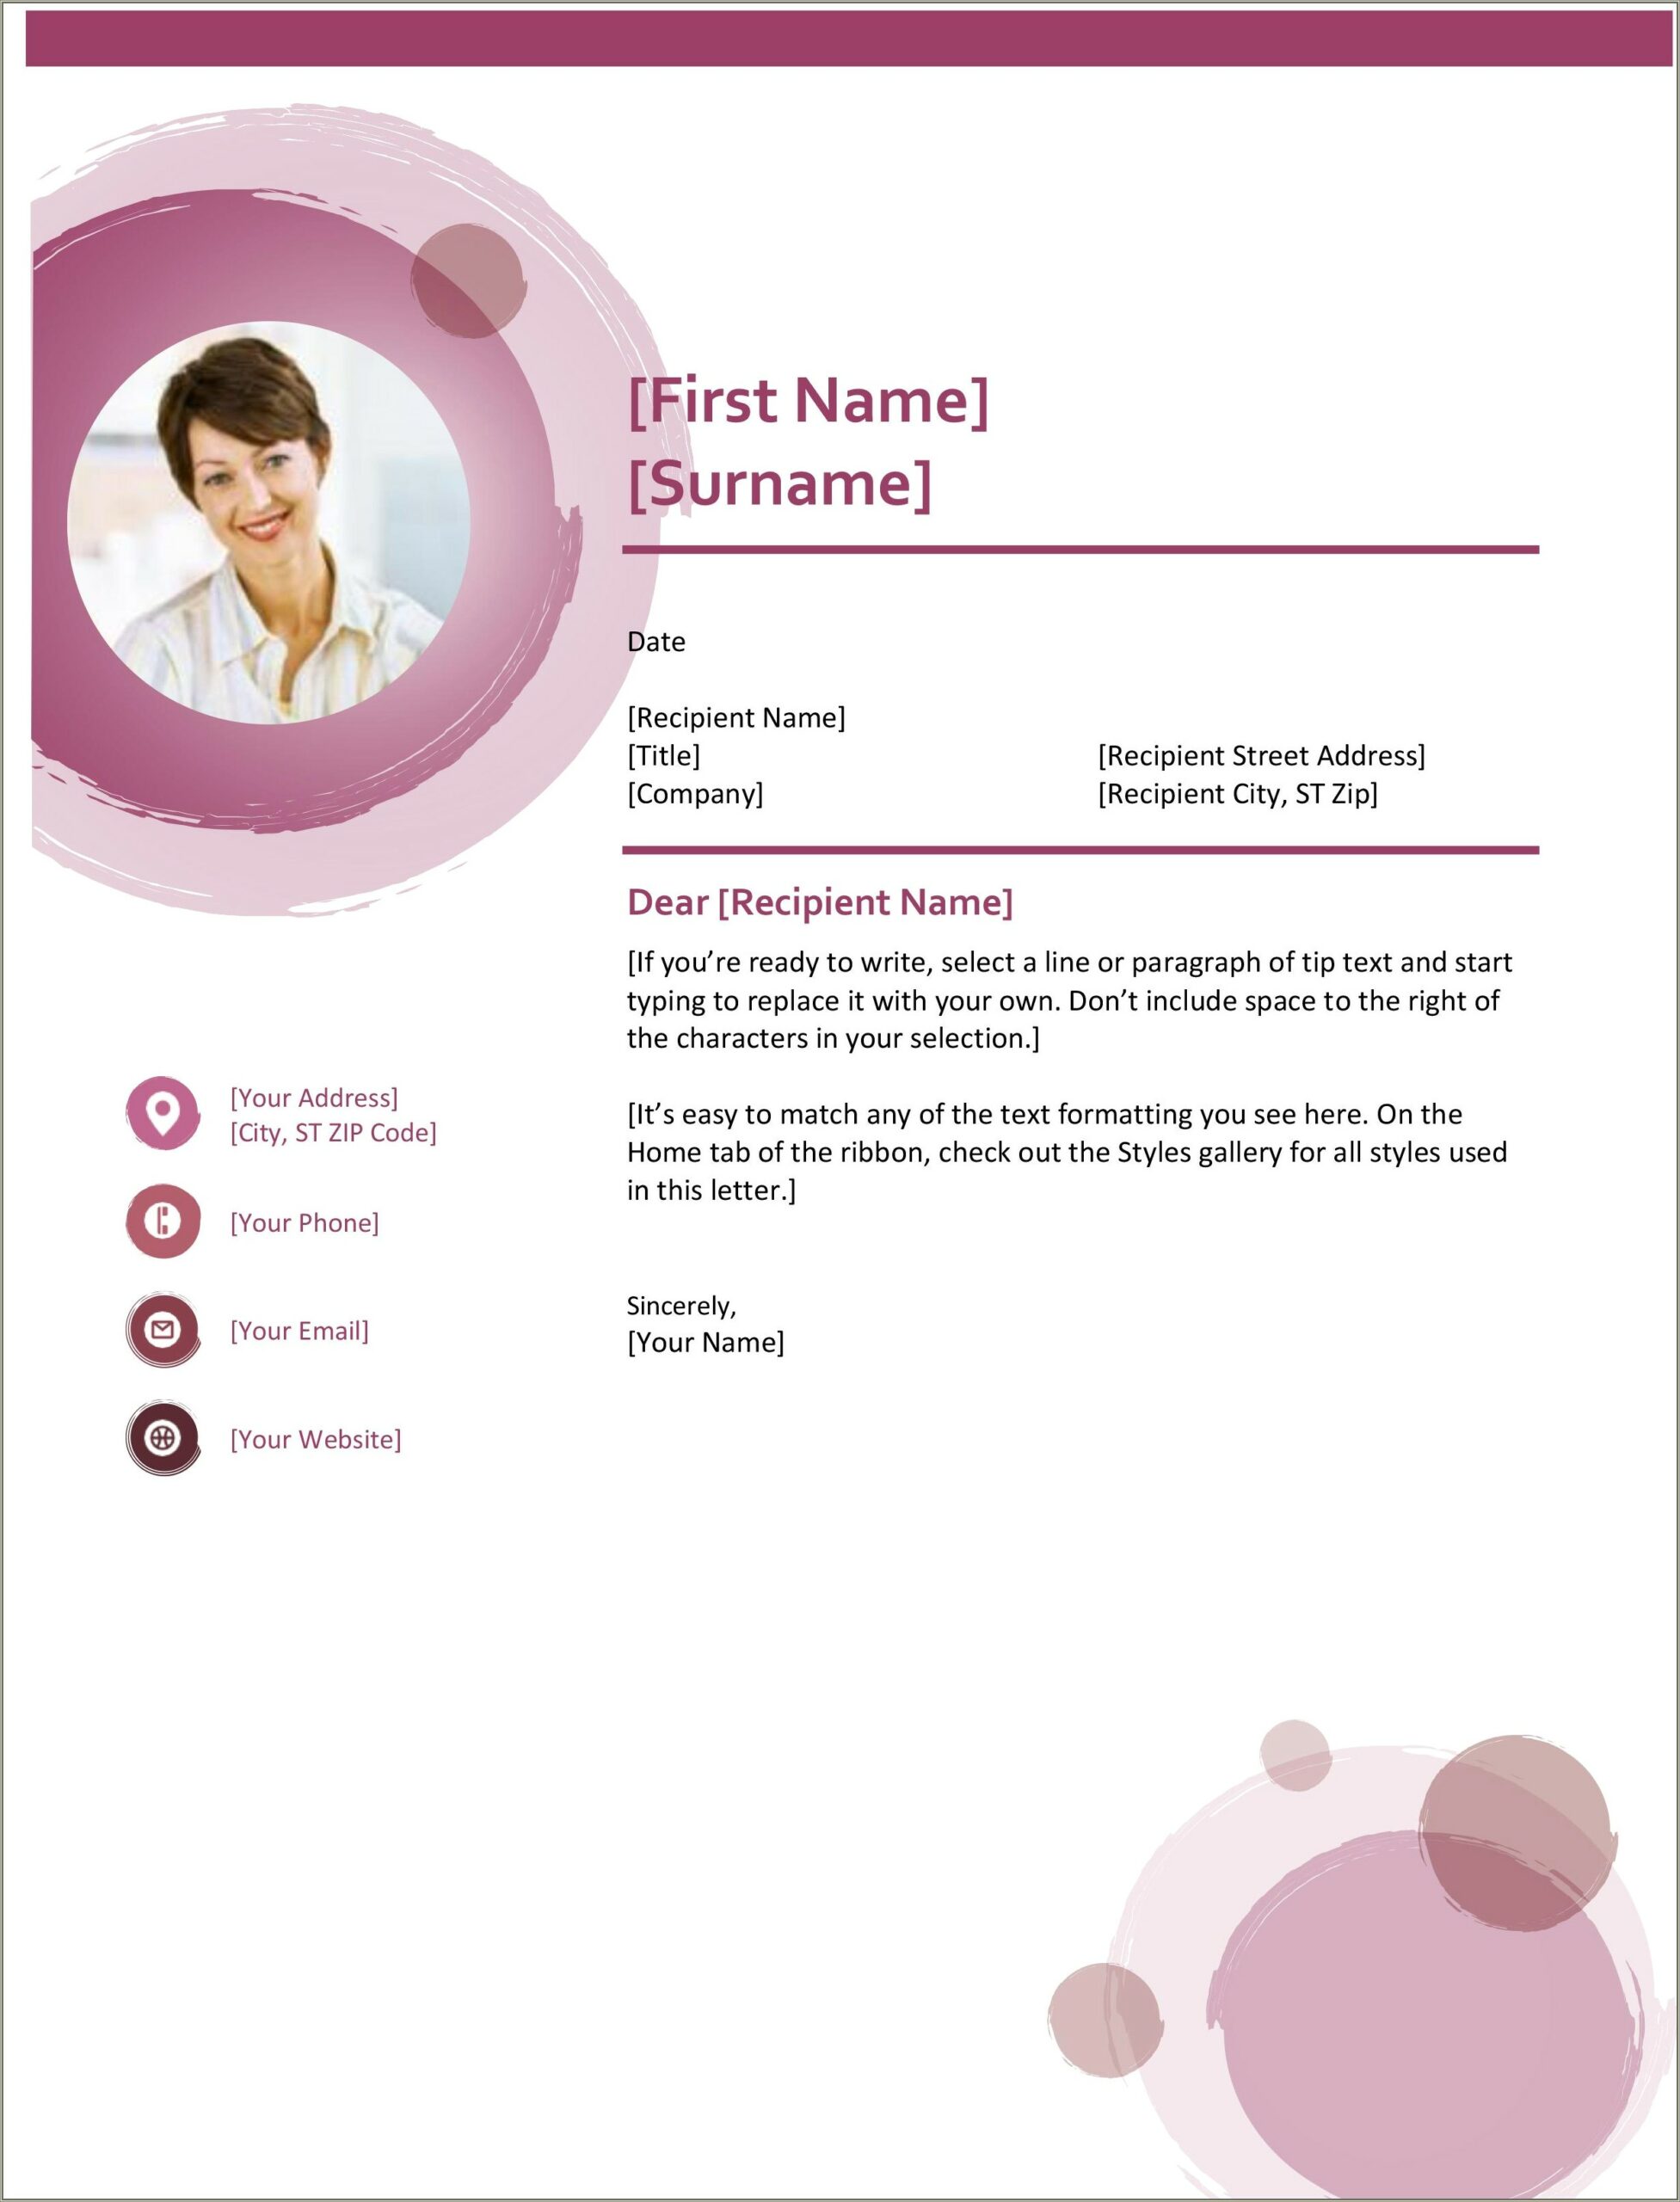 Free Microsoft Resume Cover Letter Template